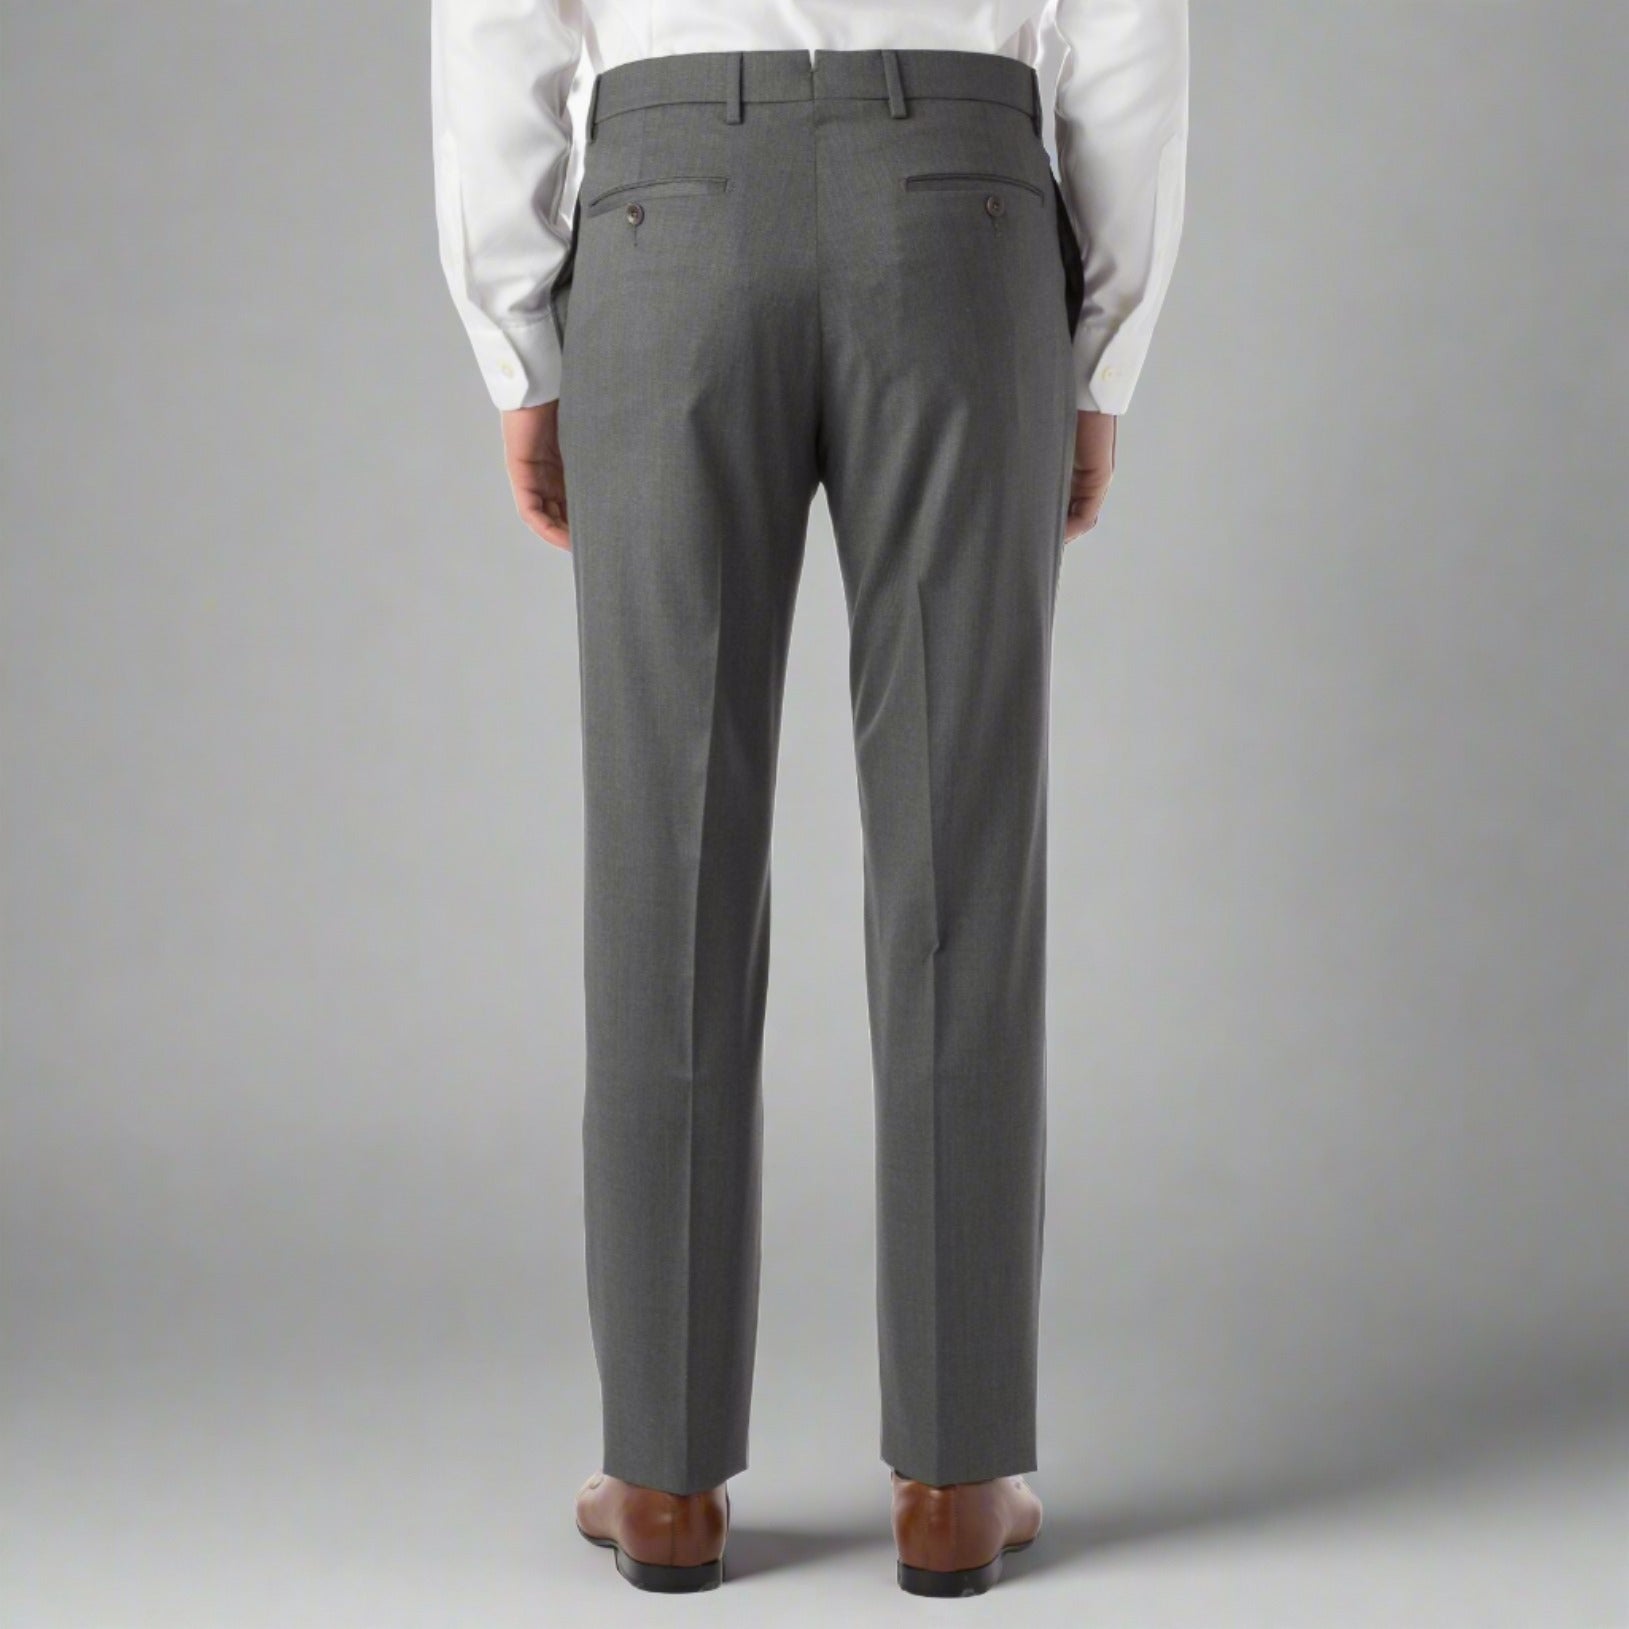 Super 130s Italian Luxury Ultimate Comfort Wool Tropical Flat Front Trouser in Medium Grey by 6 East by Ballin